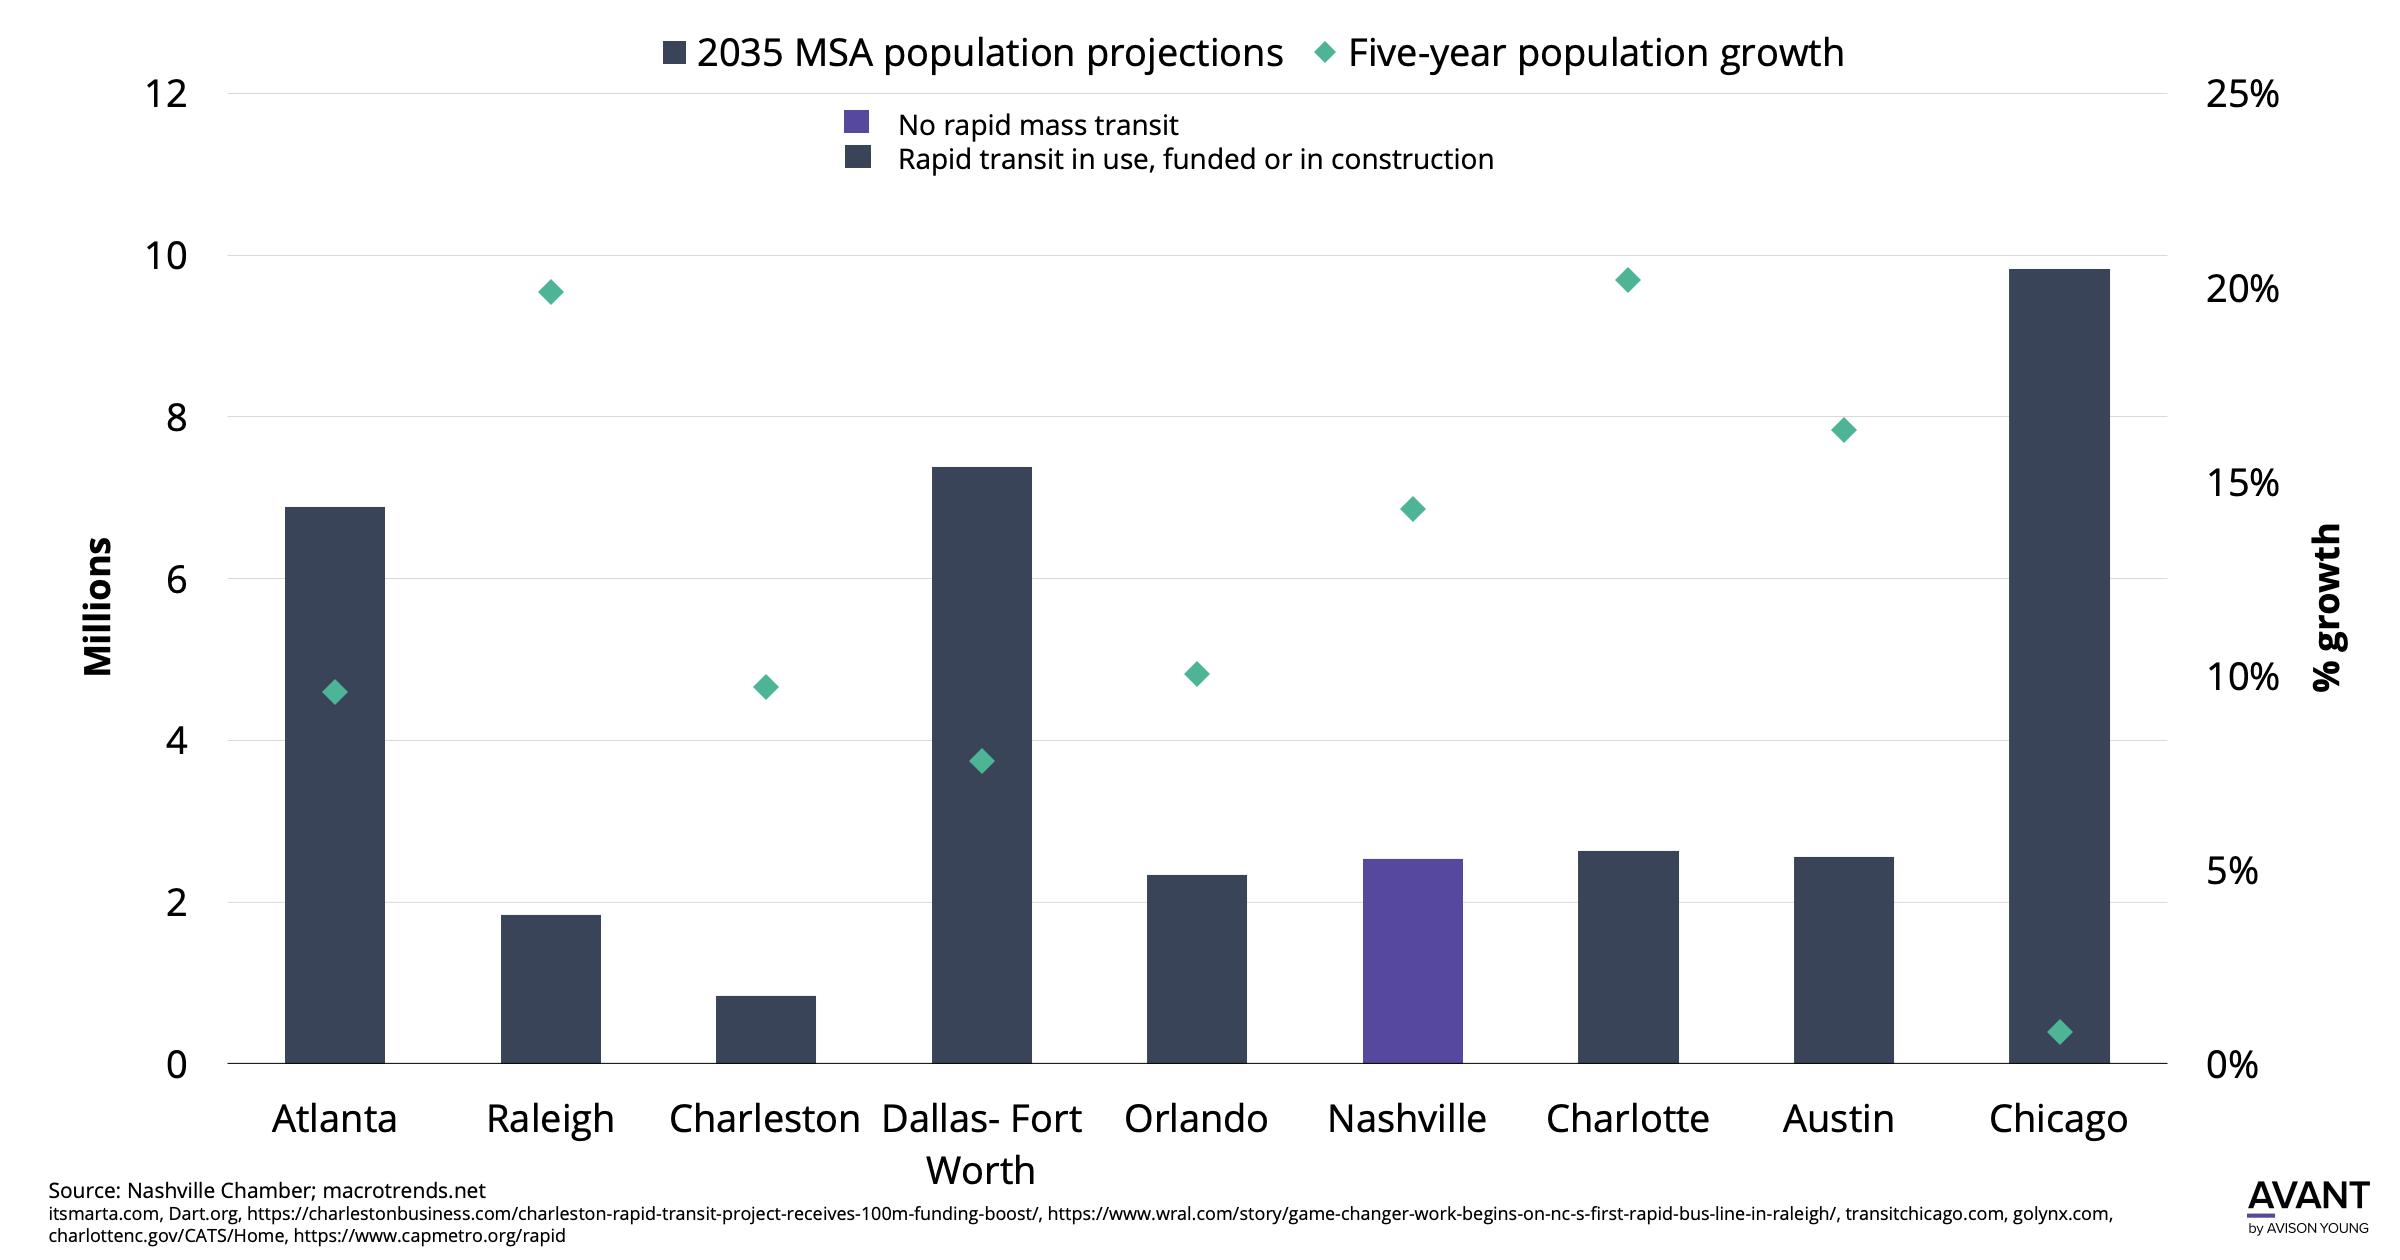 Graph of projected population growth in Nashville compared to peer cities with rapid mass transit 